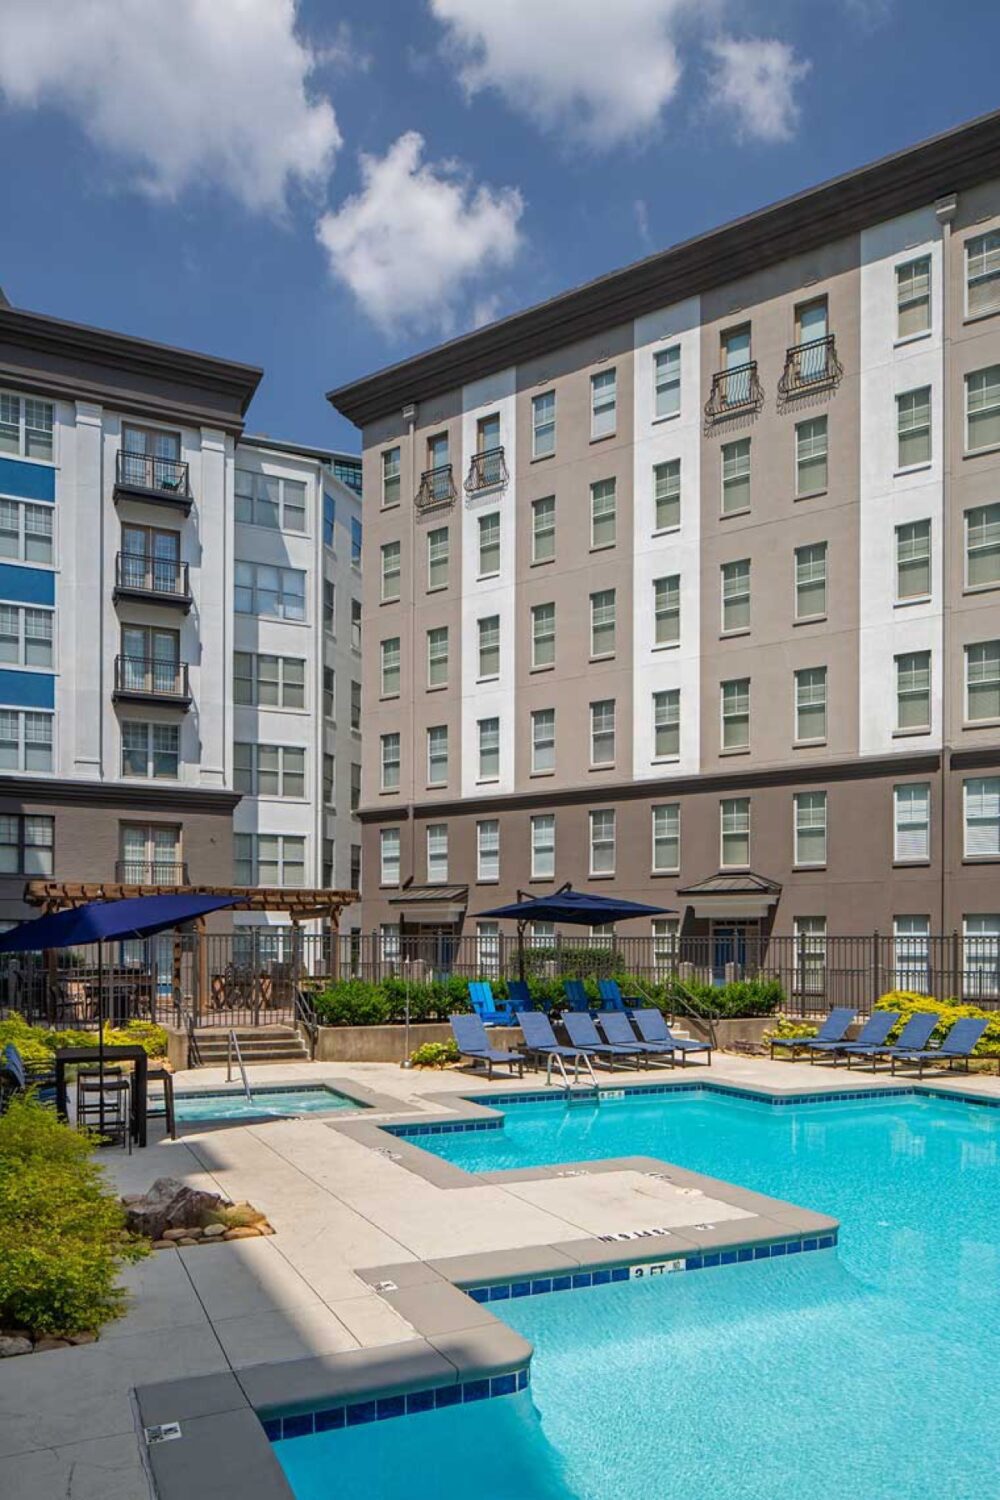 Poolside area with blue side-post umbrella and recliner chairs situated in front of an apartment building